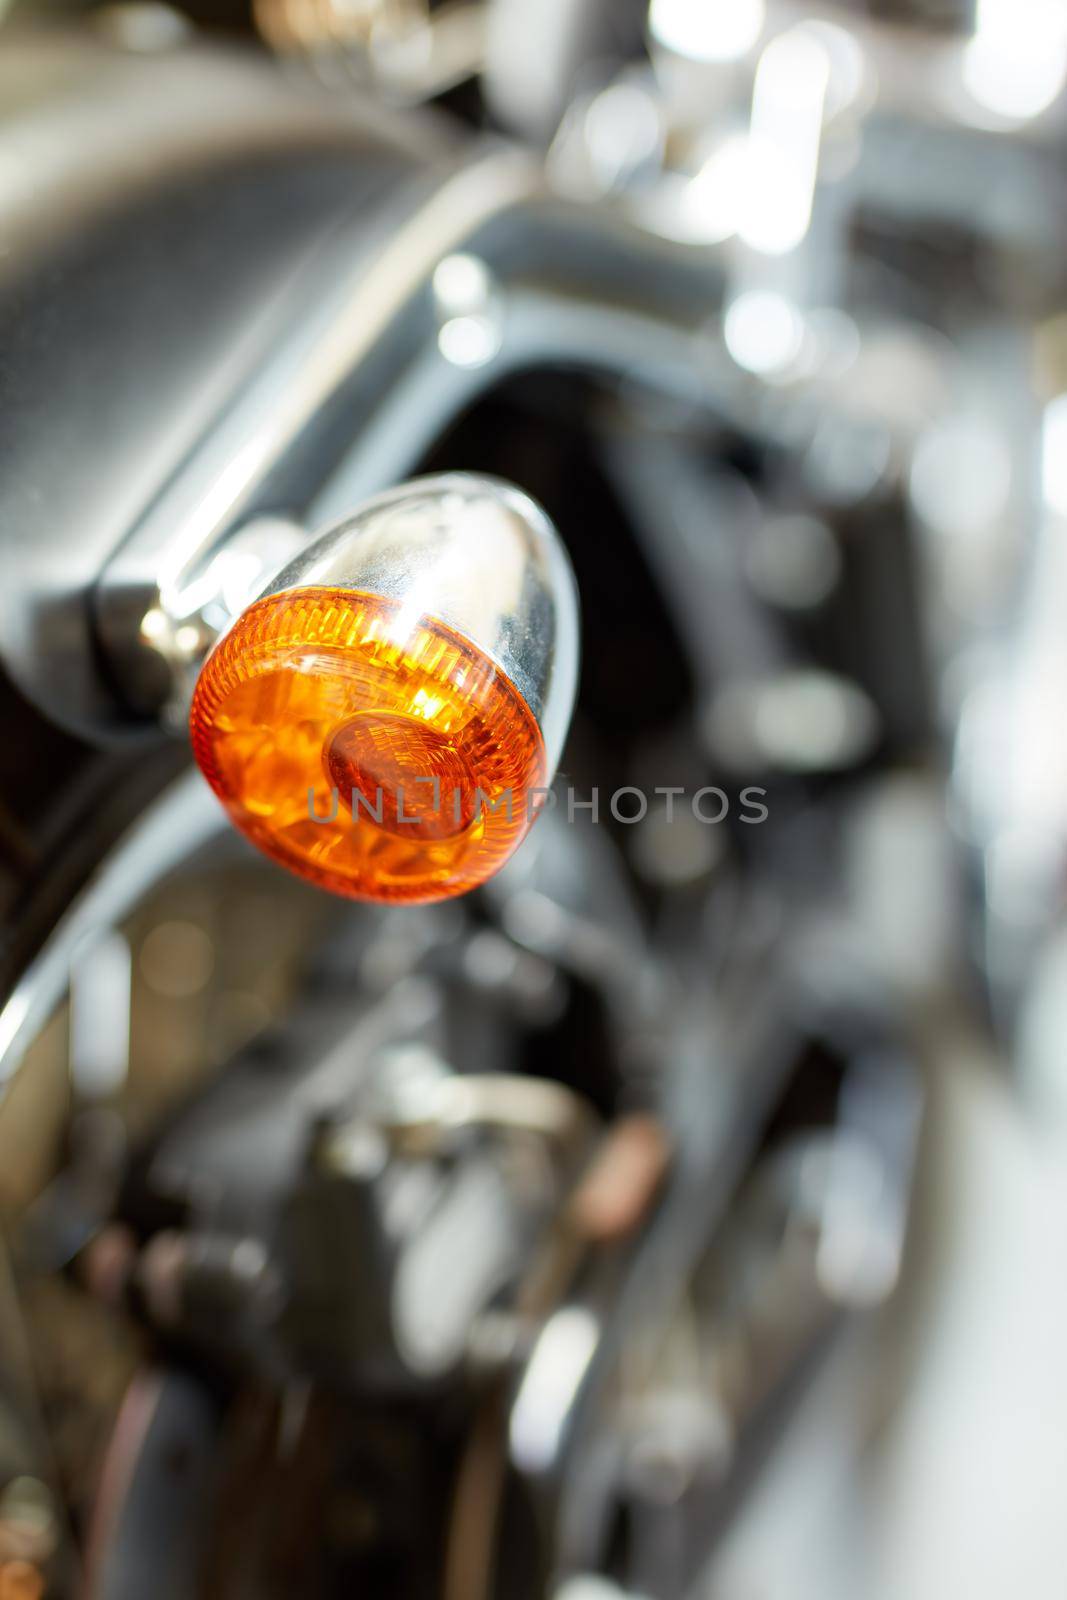 Closeup rear view of a taillight on a motorbike. Orange turning light on a blurred black vintage motorcycle. One modern chrome transportation vehicle. Maintenance on a shiny classic retro custom bike by YuriArcurs